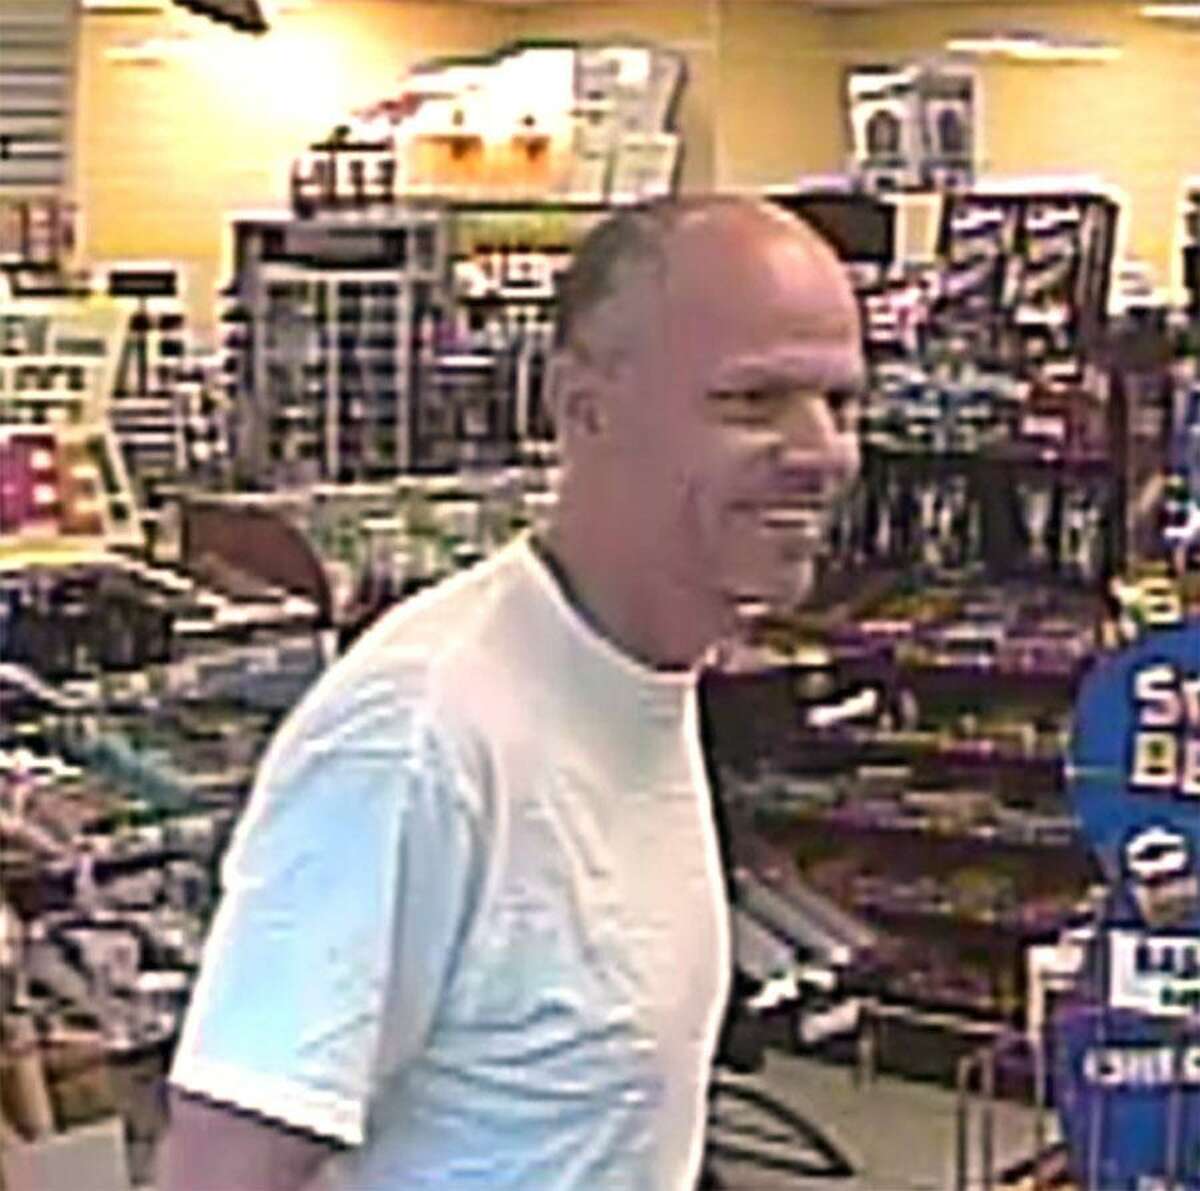 Robert Hoagland of Newtown was found dead in upstate New York after he disappeared more than nine years ago, answering some questions but leaving others. This surveillance picture was taken on the day he was last seen in July 2013. 